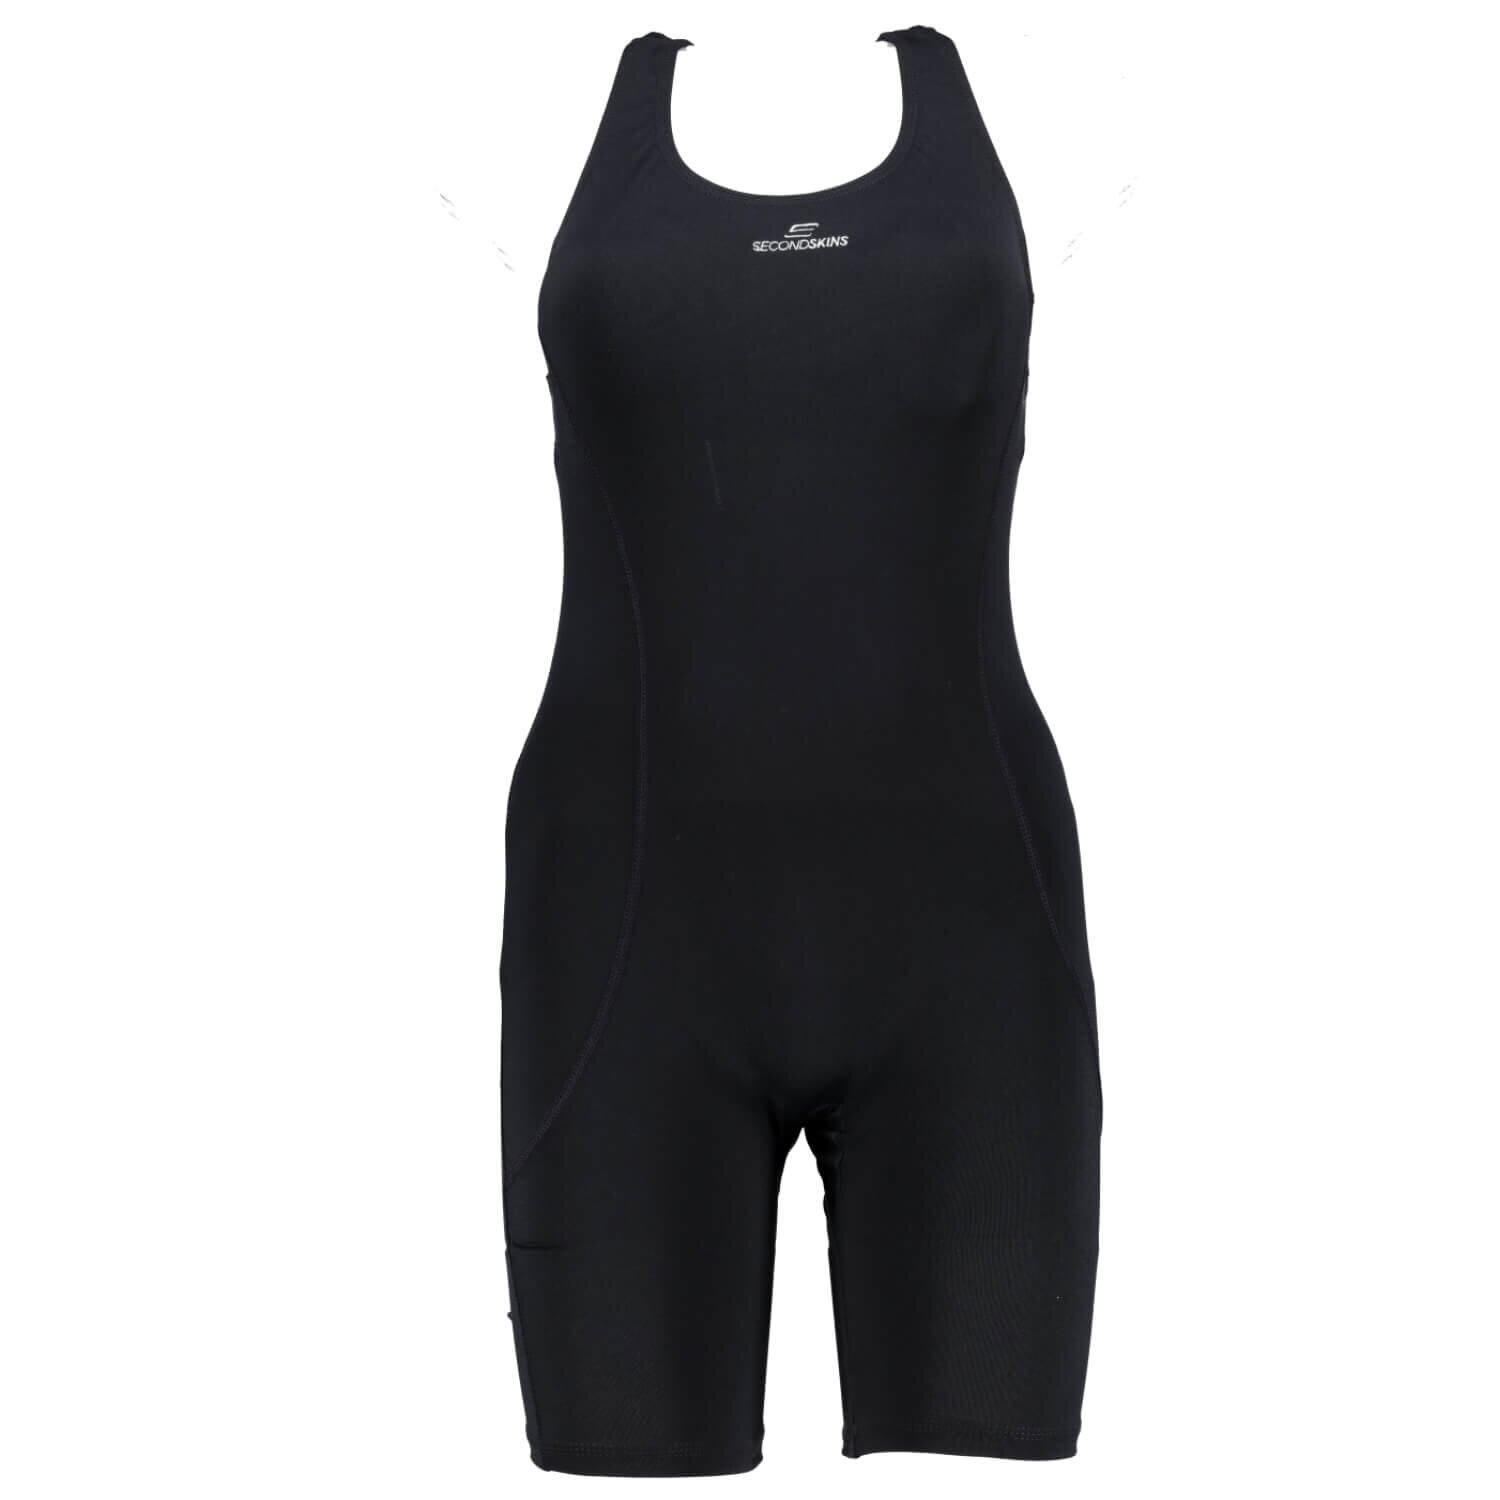 Second Skins Women's Duraskins Unitard with Removable Cups | Sportsmans ...